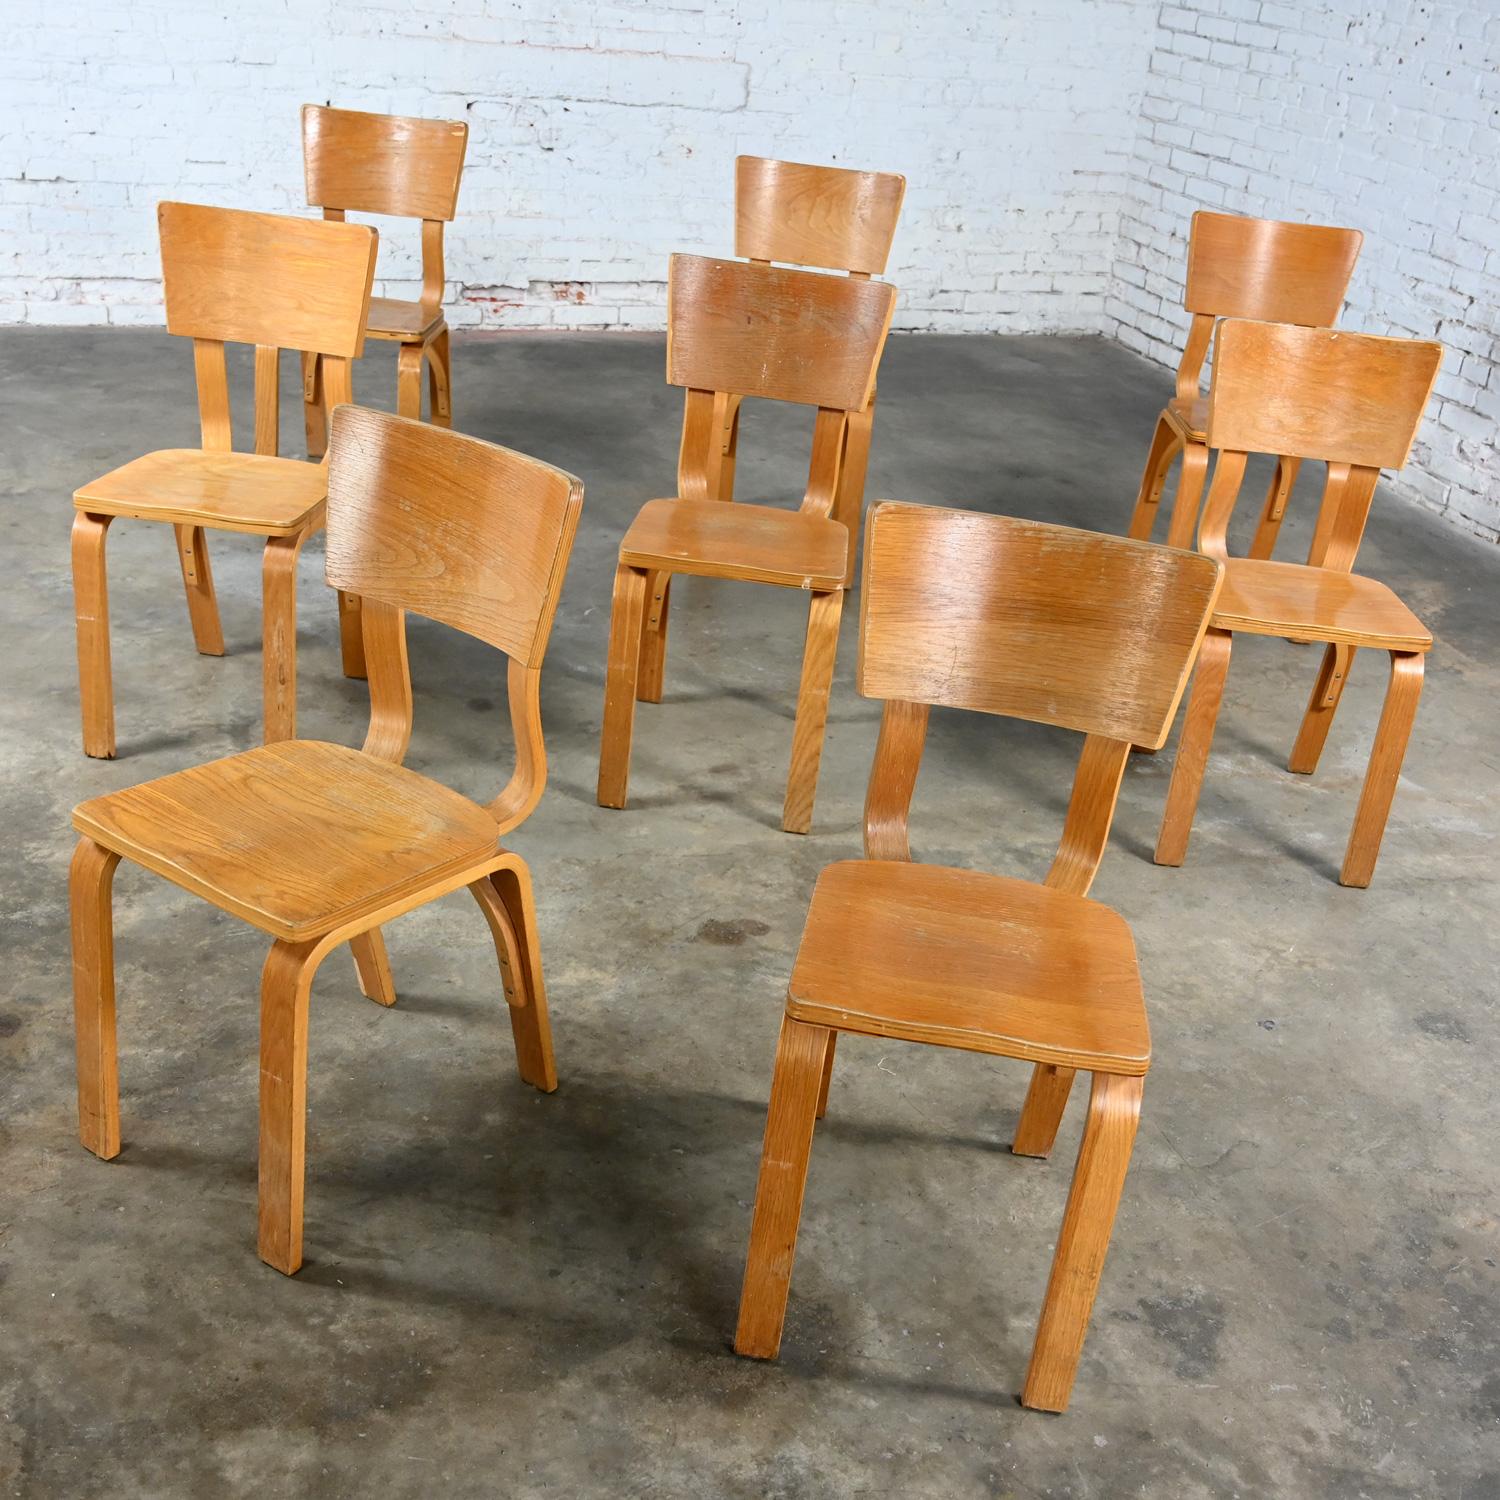 Marvelous vintage Mid-Century Modern Thonet #1216-S17-B1 dining chairs comprised of bent oak plywood with saddle seats and a single bow back stretcher, set of 8. Beautiful condition, keeping in mind that these are vintage and not new so will have